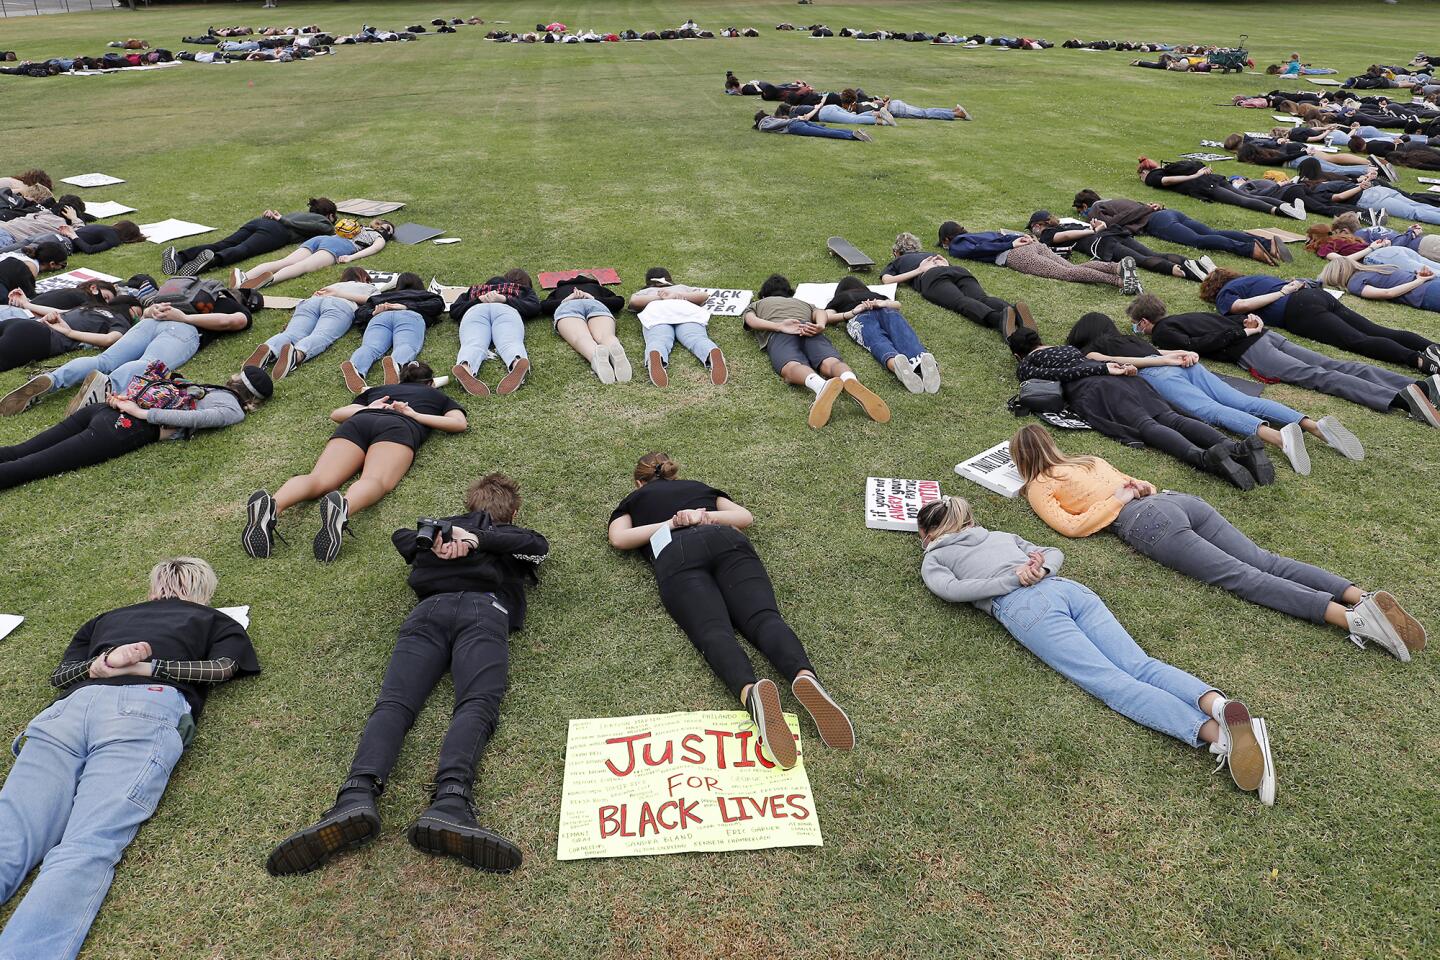 Students demonstrators lay on the ground with their arms crossed behind their backs for eight minutes and 46 seconds during a peaceful protest for George Floyd, Breonna Taylor and Black Lives Matter on Friday at Worthy Park in Huntington Beach.